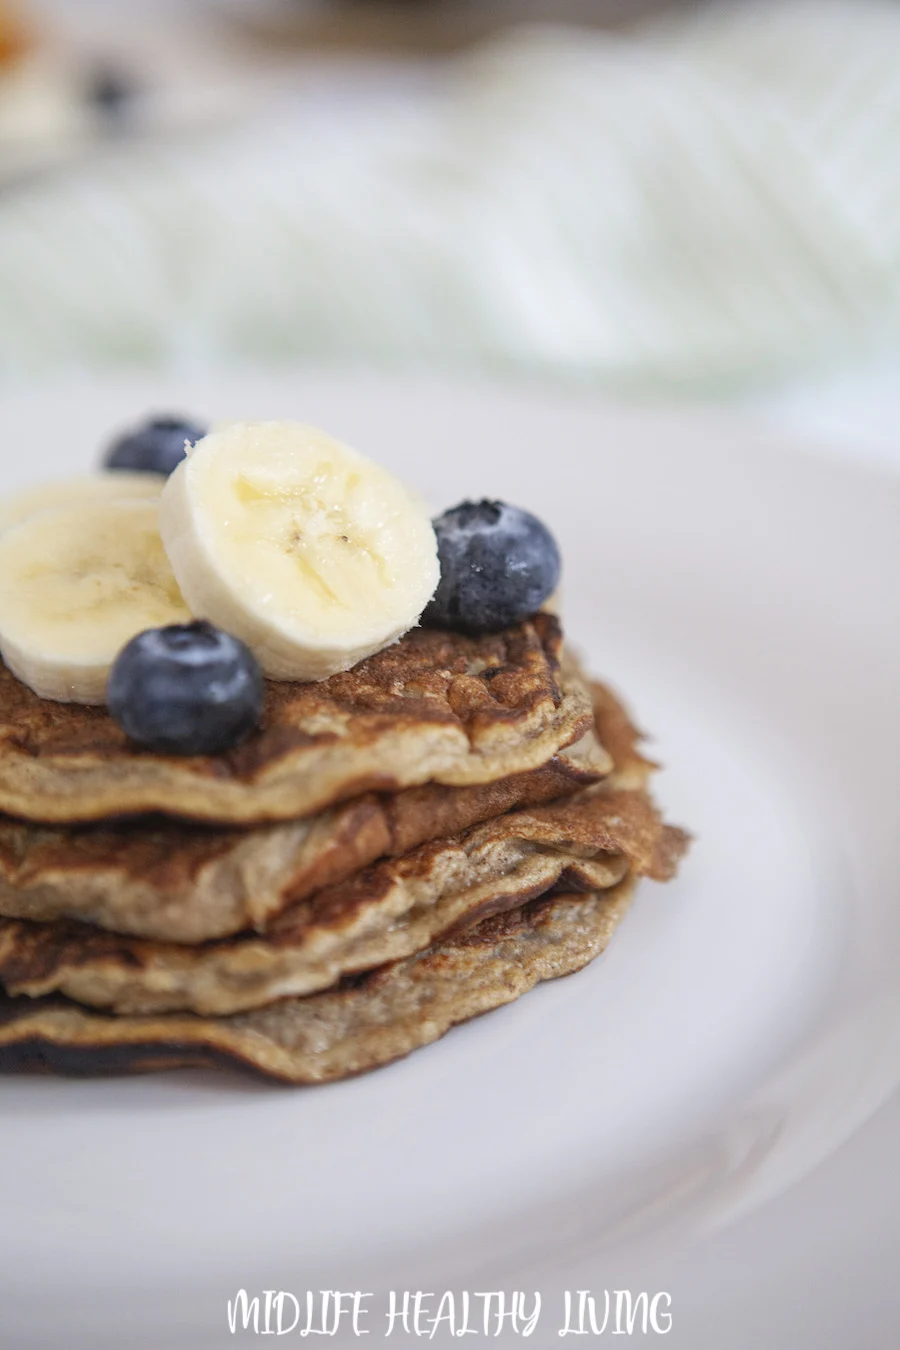 Here we see a stack of the ww banana pancakes ready to eat. 